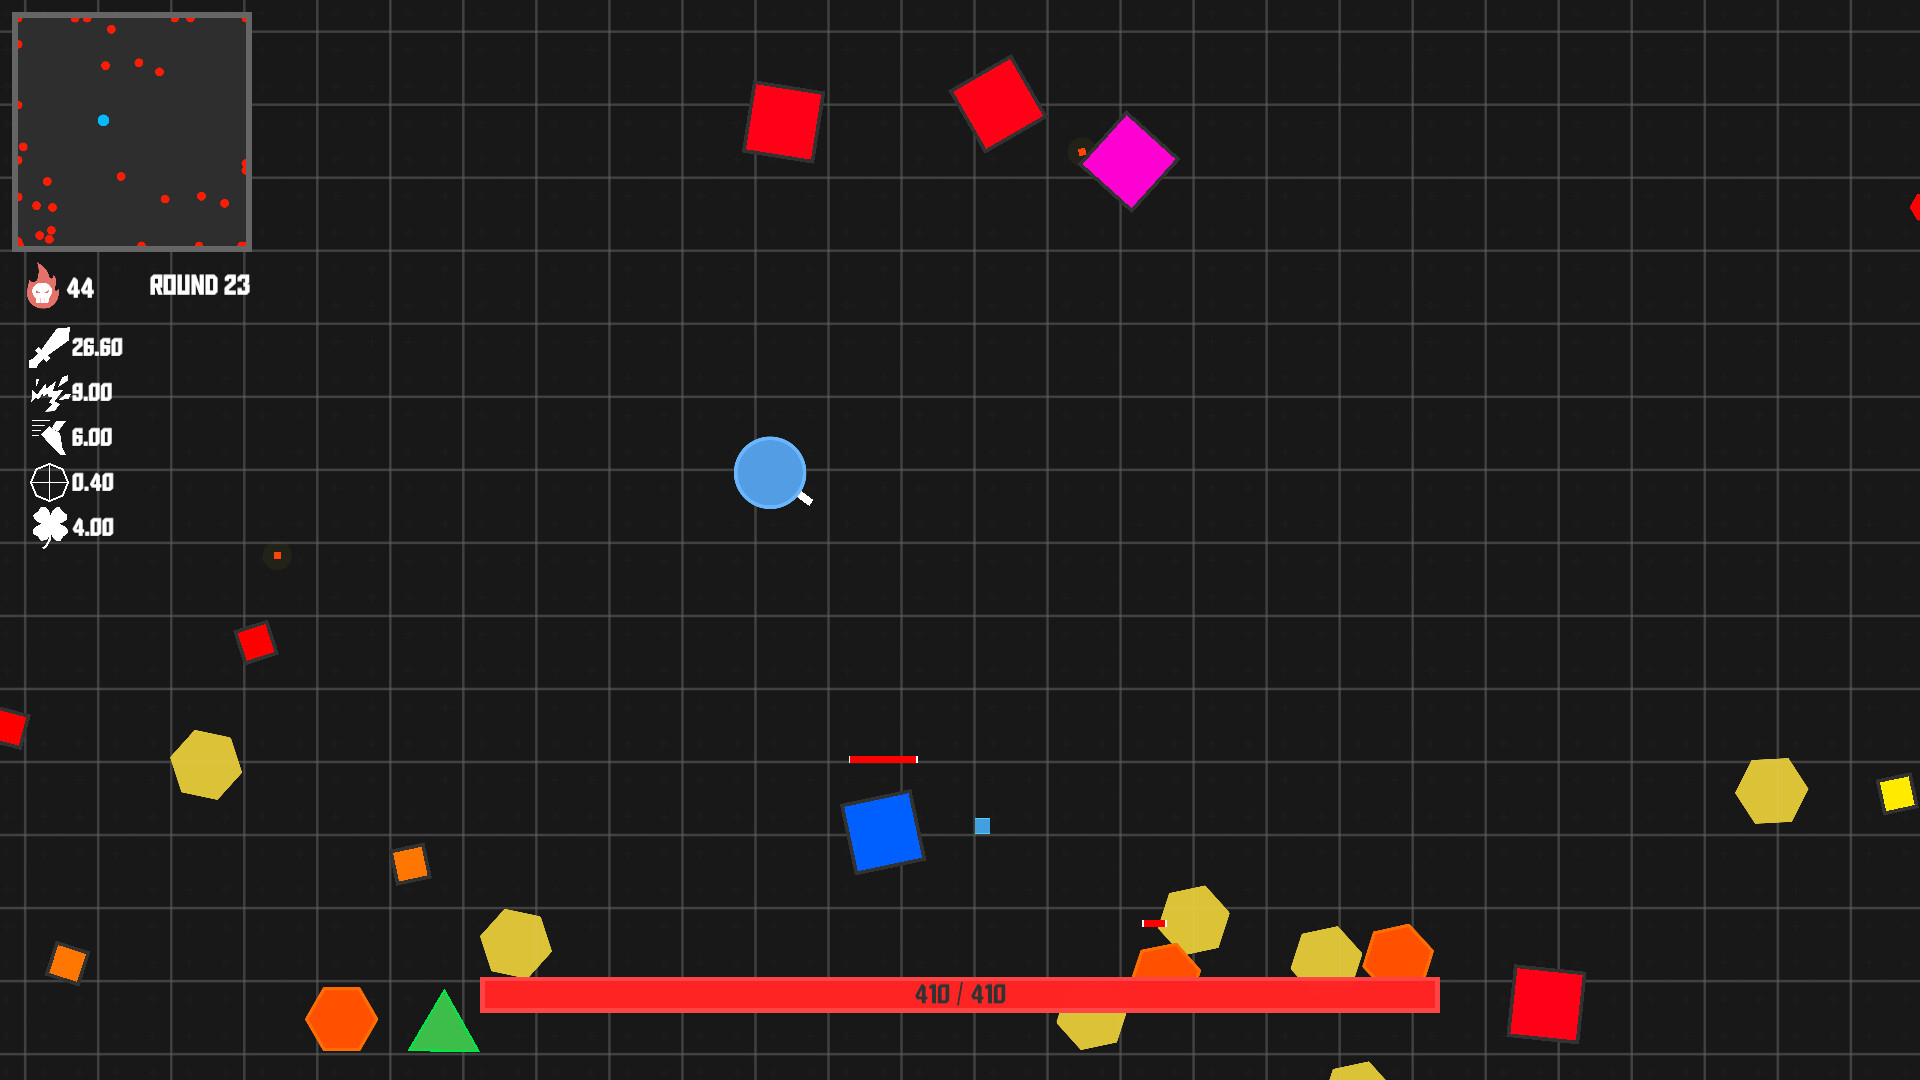 What the hell is happening with diep.io?